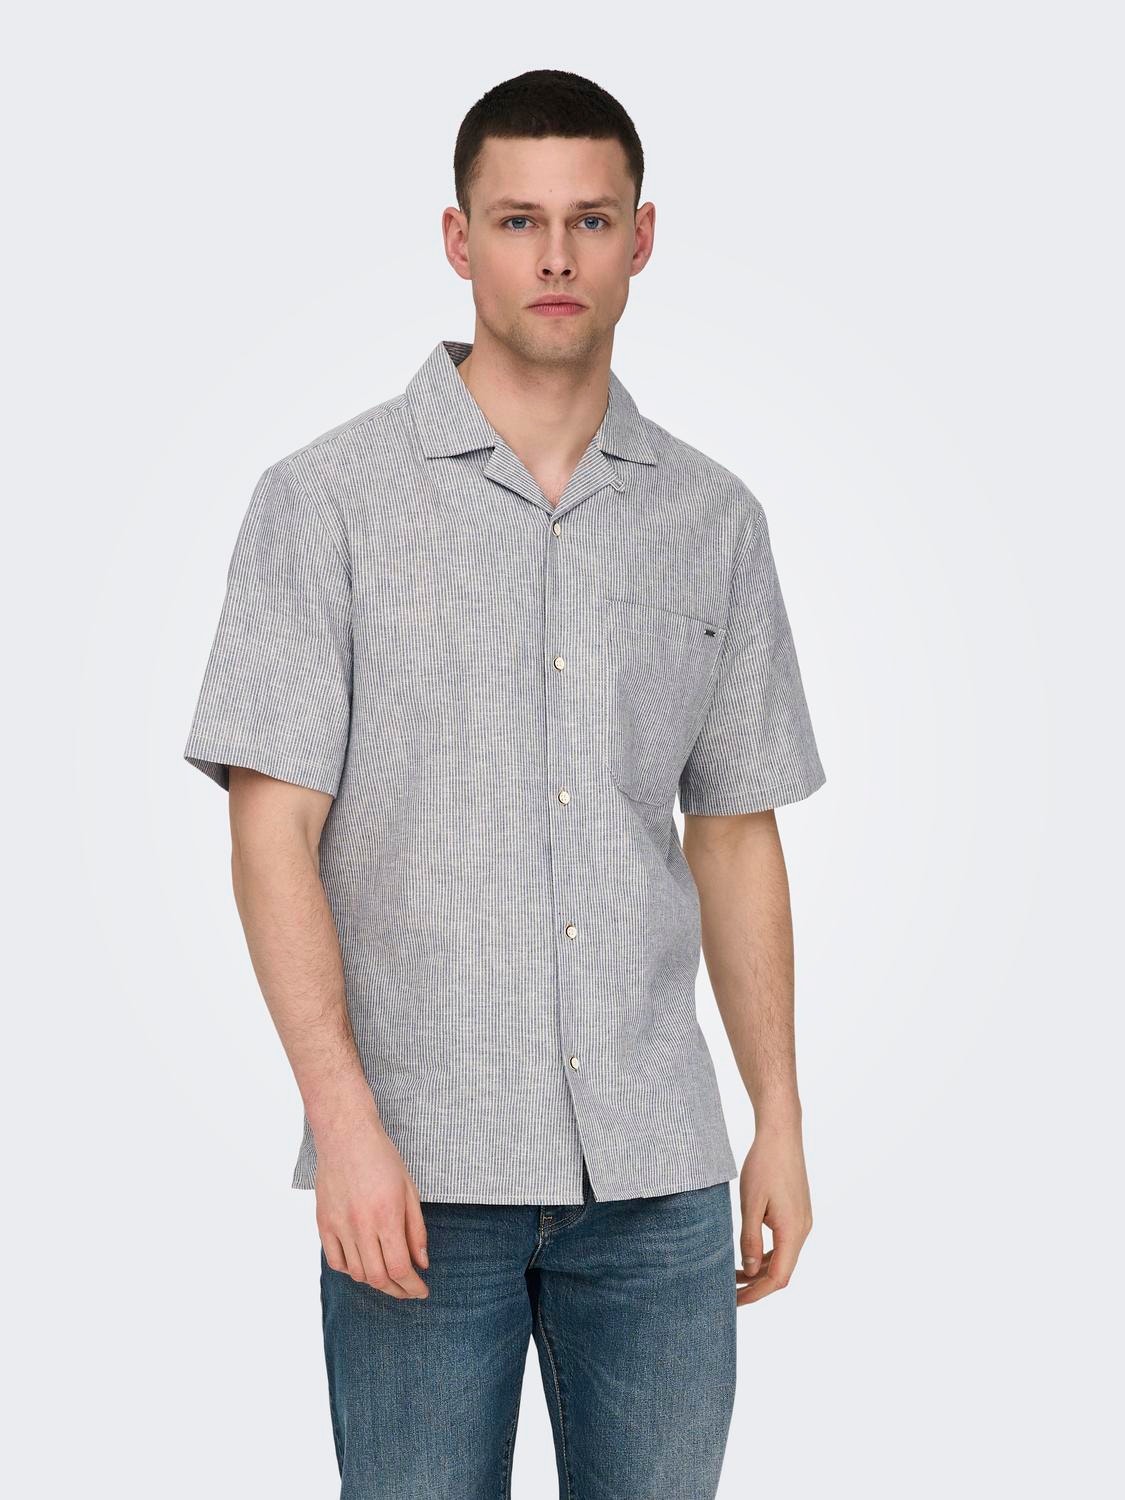 ONLY & SONS Camisas Corte relaxed Cuello cubano -Bering Sea - 22028833